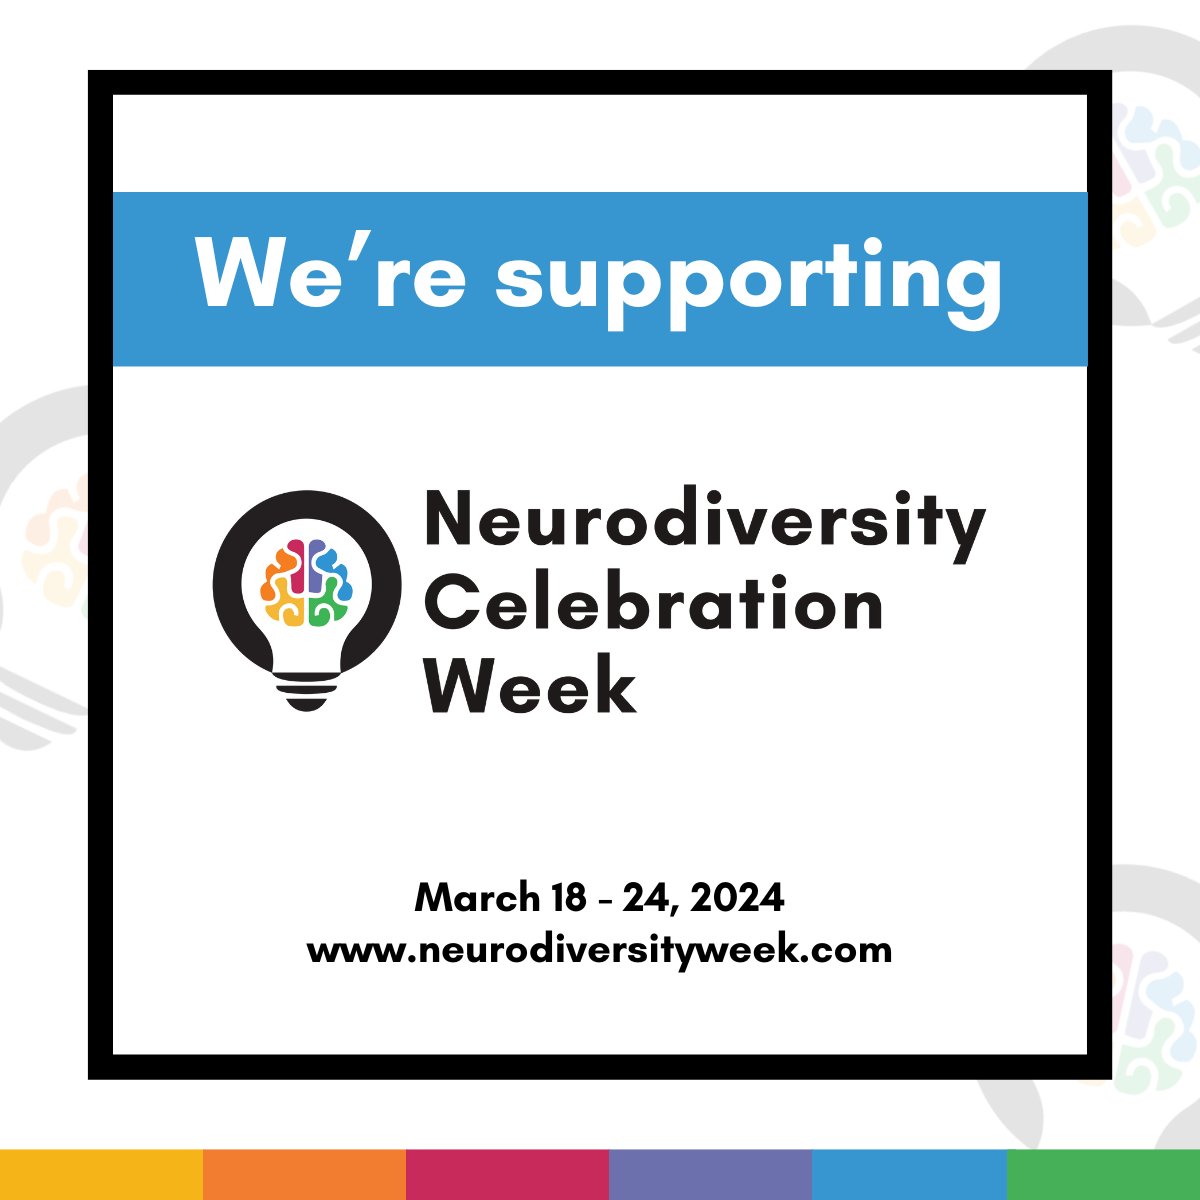 Did you know this is Neurodiversity Celebration Week? Neurodiversity is an umbrella term used to describe alternative thinking styles such as Dyslexia, Dyspraxia, Dyscalculia, Autism & ADHD. It is about recognising those who think differently, and celebrating those differences.